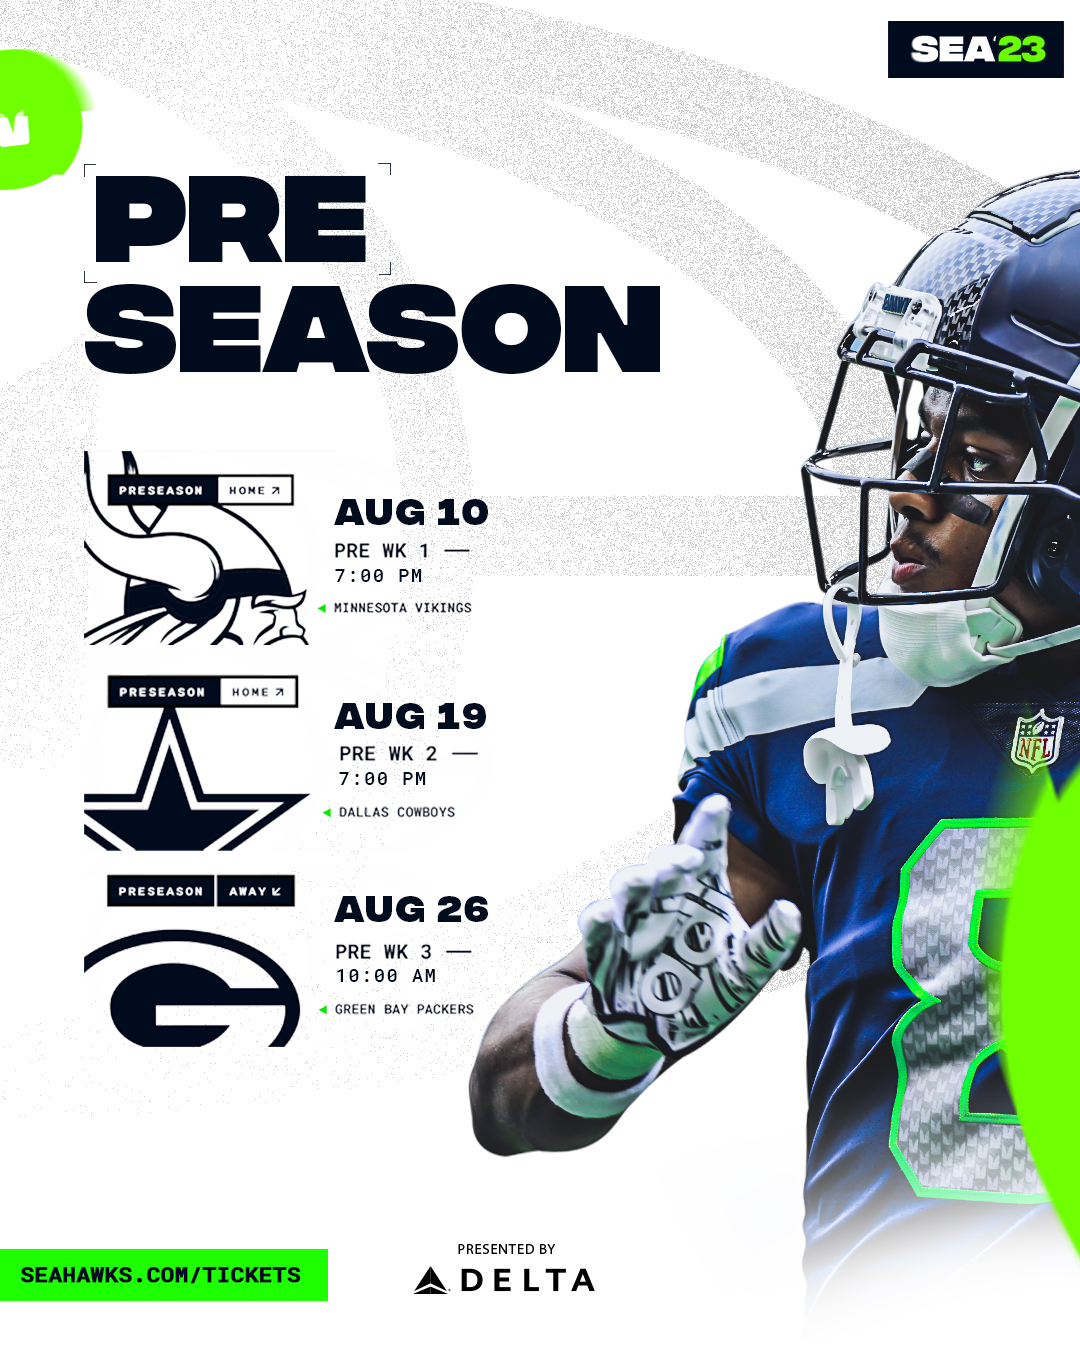 Seahawks PR on X: 'Preseason dates and times have been announced! All @Seahawks  preseason games can be heard on Seattle Sports 710AM and KIRO Newsradio  97.3 FM, and will be televised on